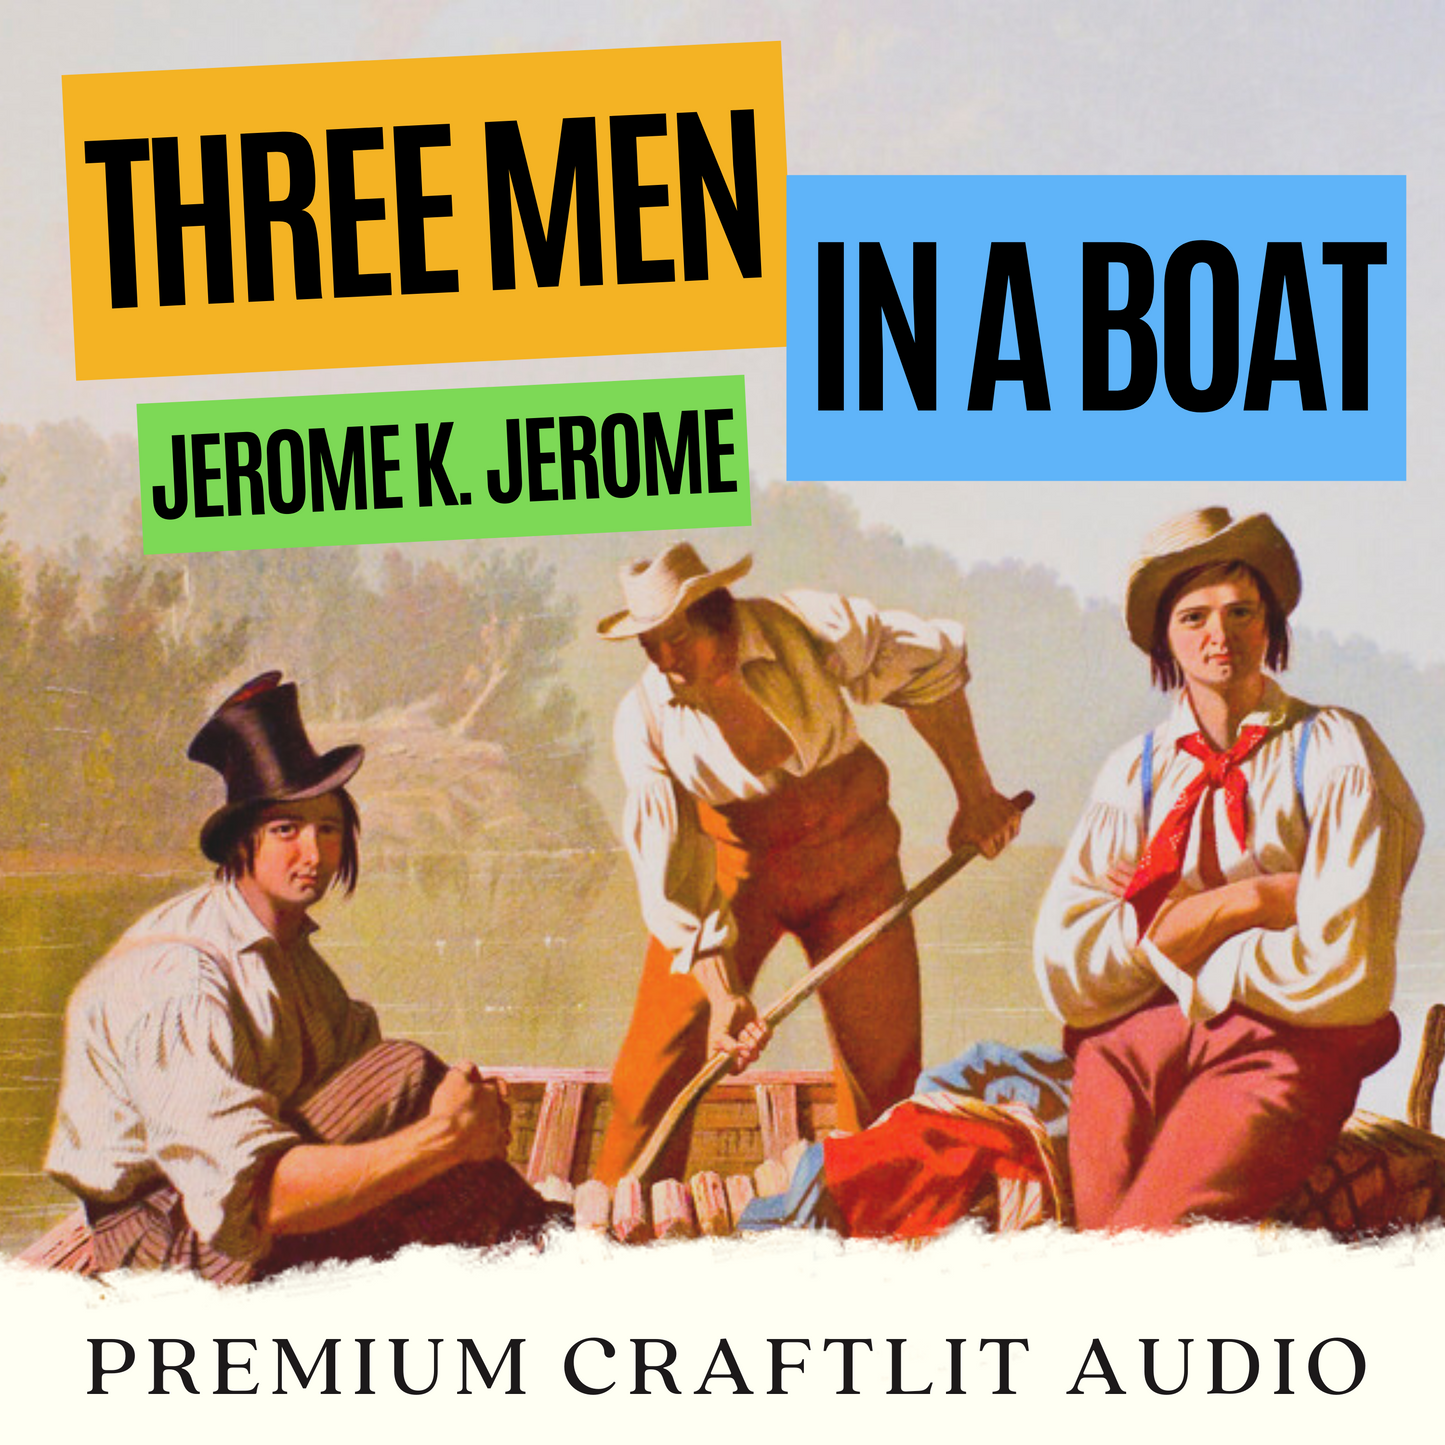 Jerome K. Jerome's Three Men in a Boat | Digital Annotated Audiobook